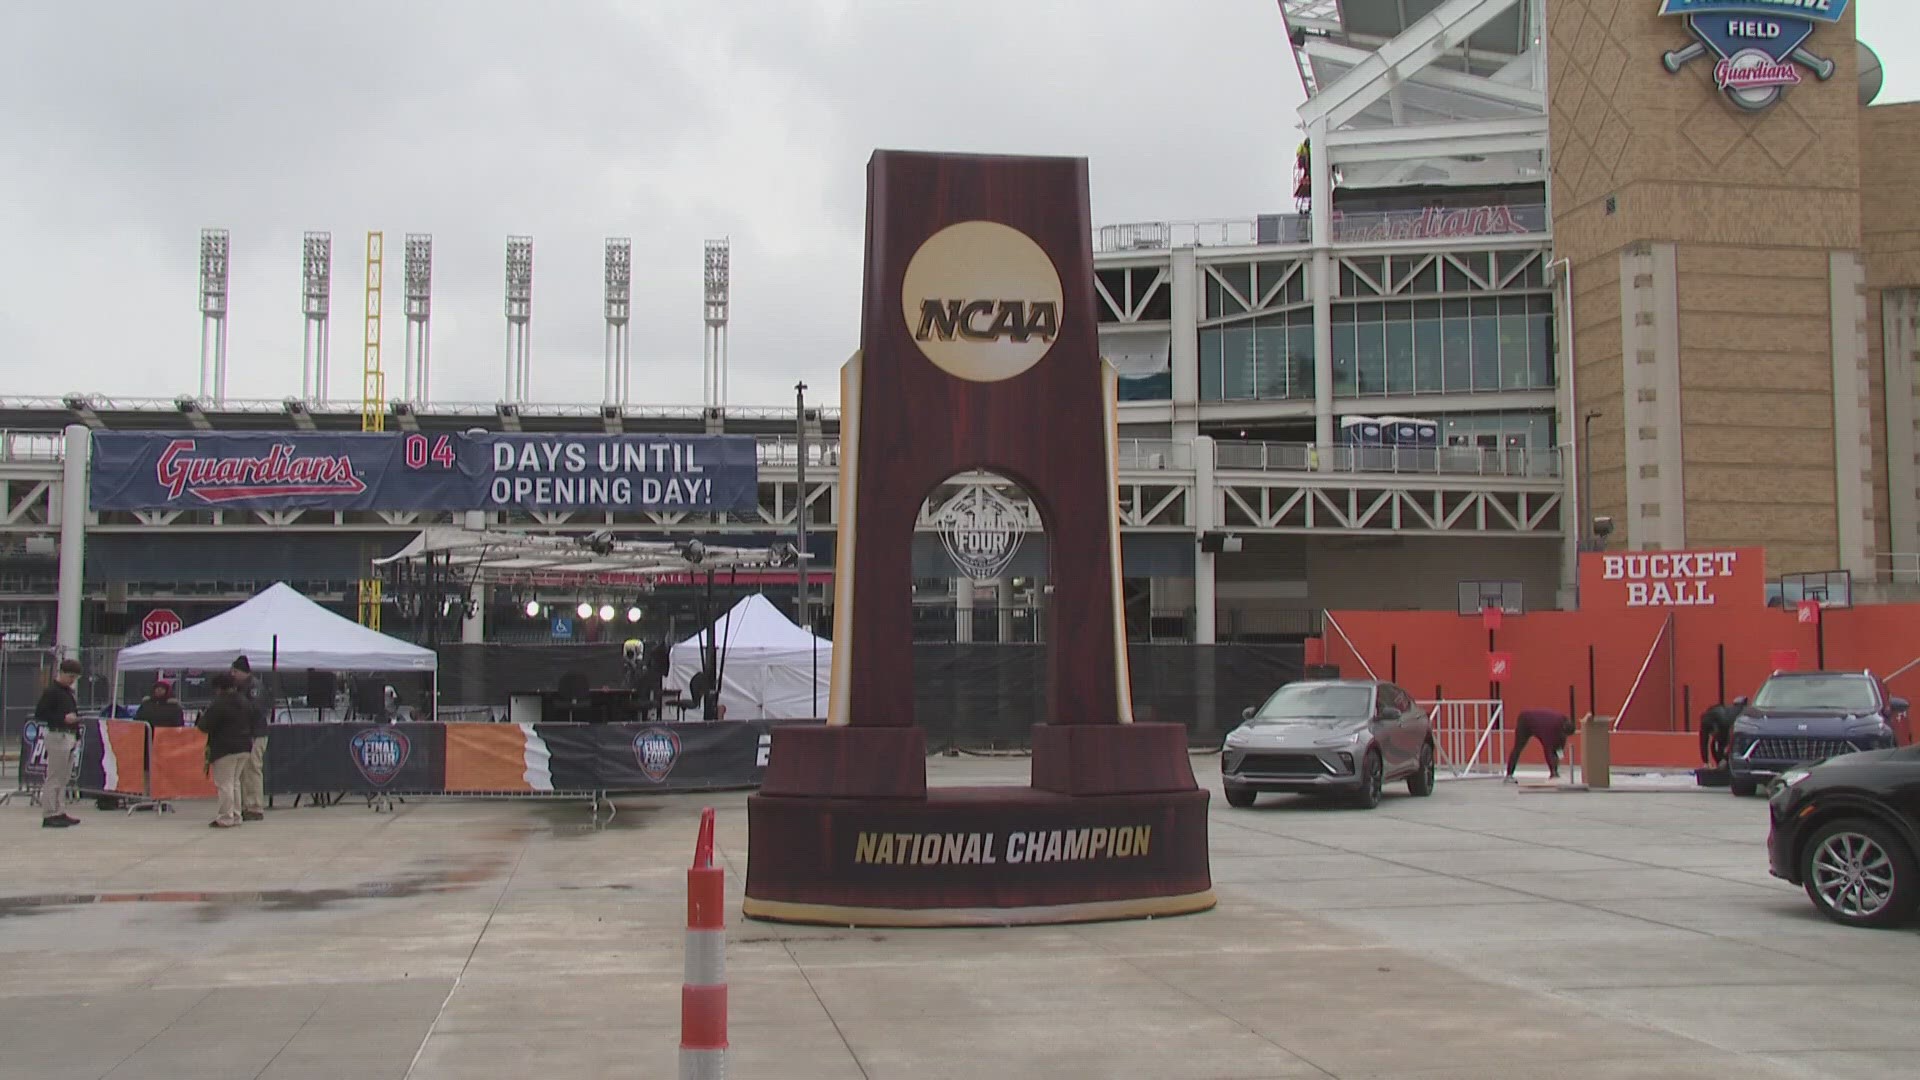 A champion will be crowned Sunday at the NCAA Women's Basketball Championship in Cleveland, and there's plenty to do downtown before and during the game.